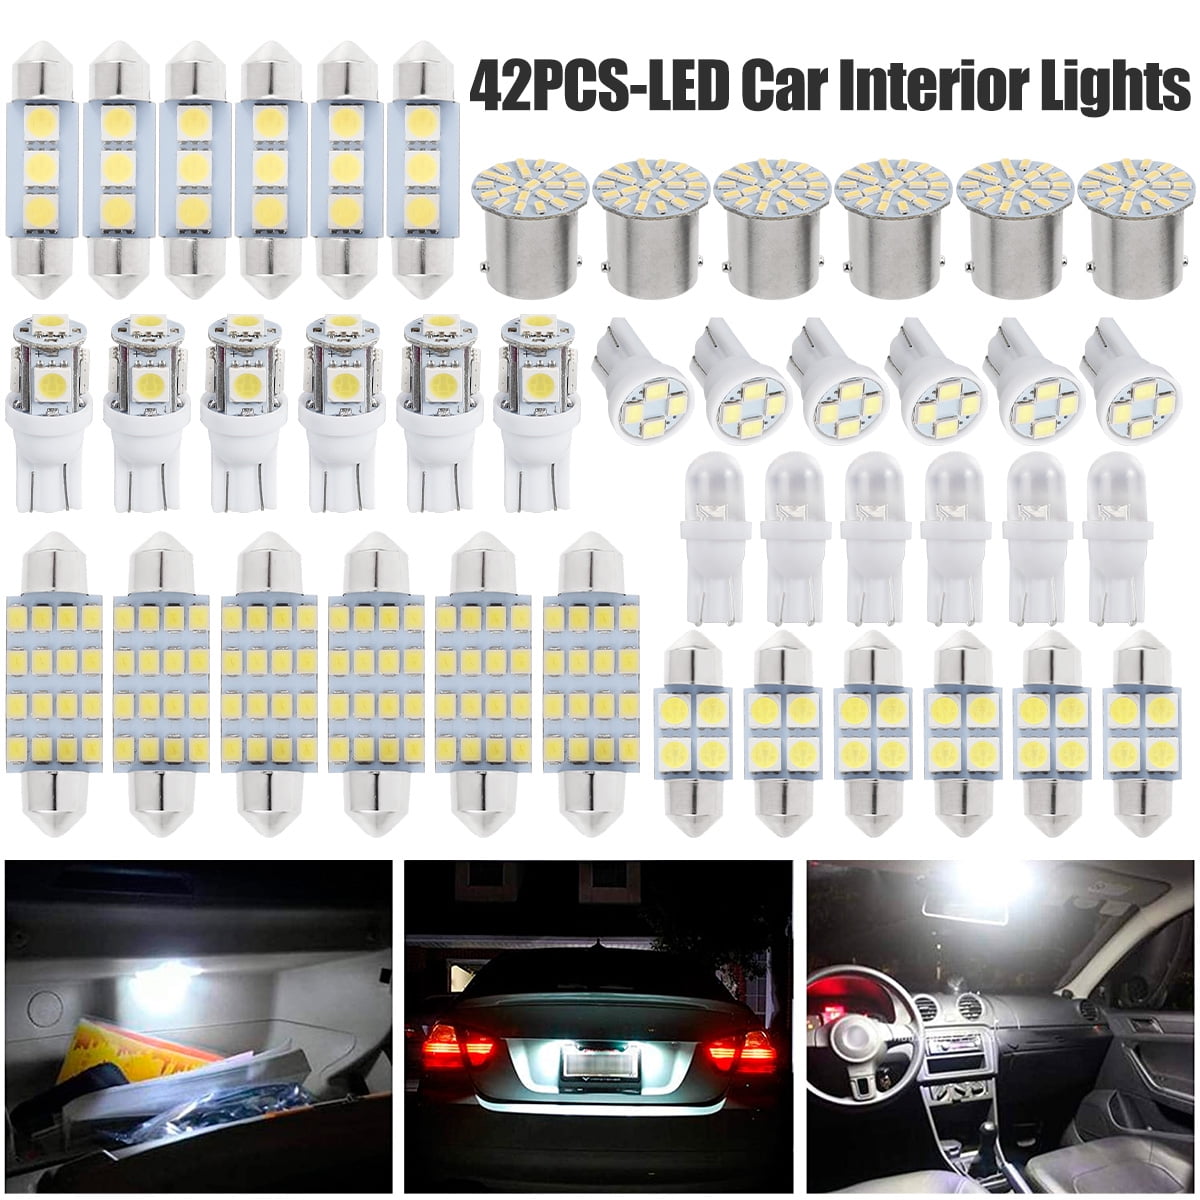  2pcs for Superman Car Door Lights Logo Projector Led Wireless  Car Door Shadow Lights Welcome Courtesy Lights for All car Models :  Automotive